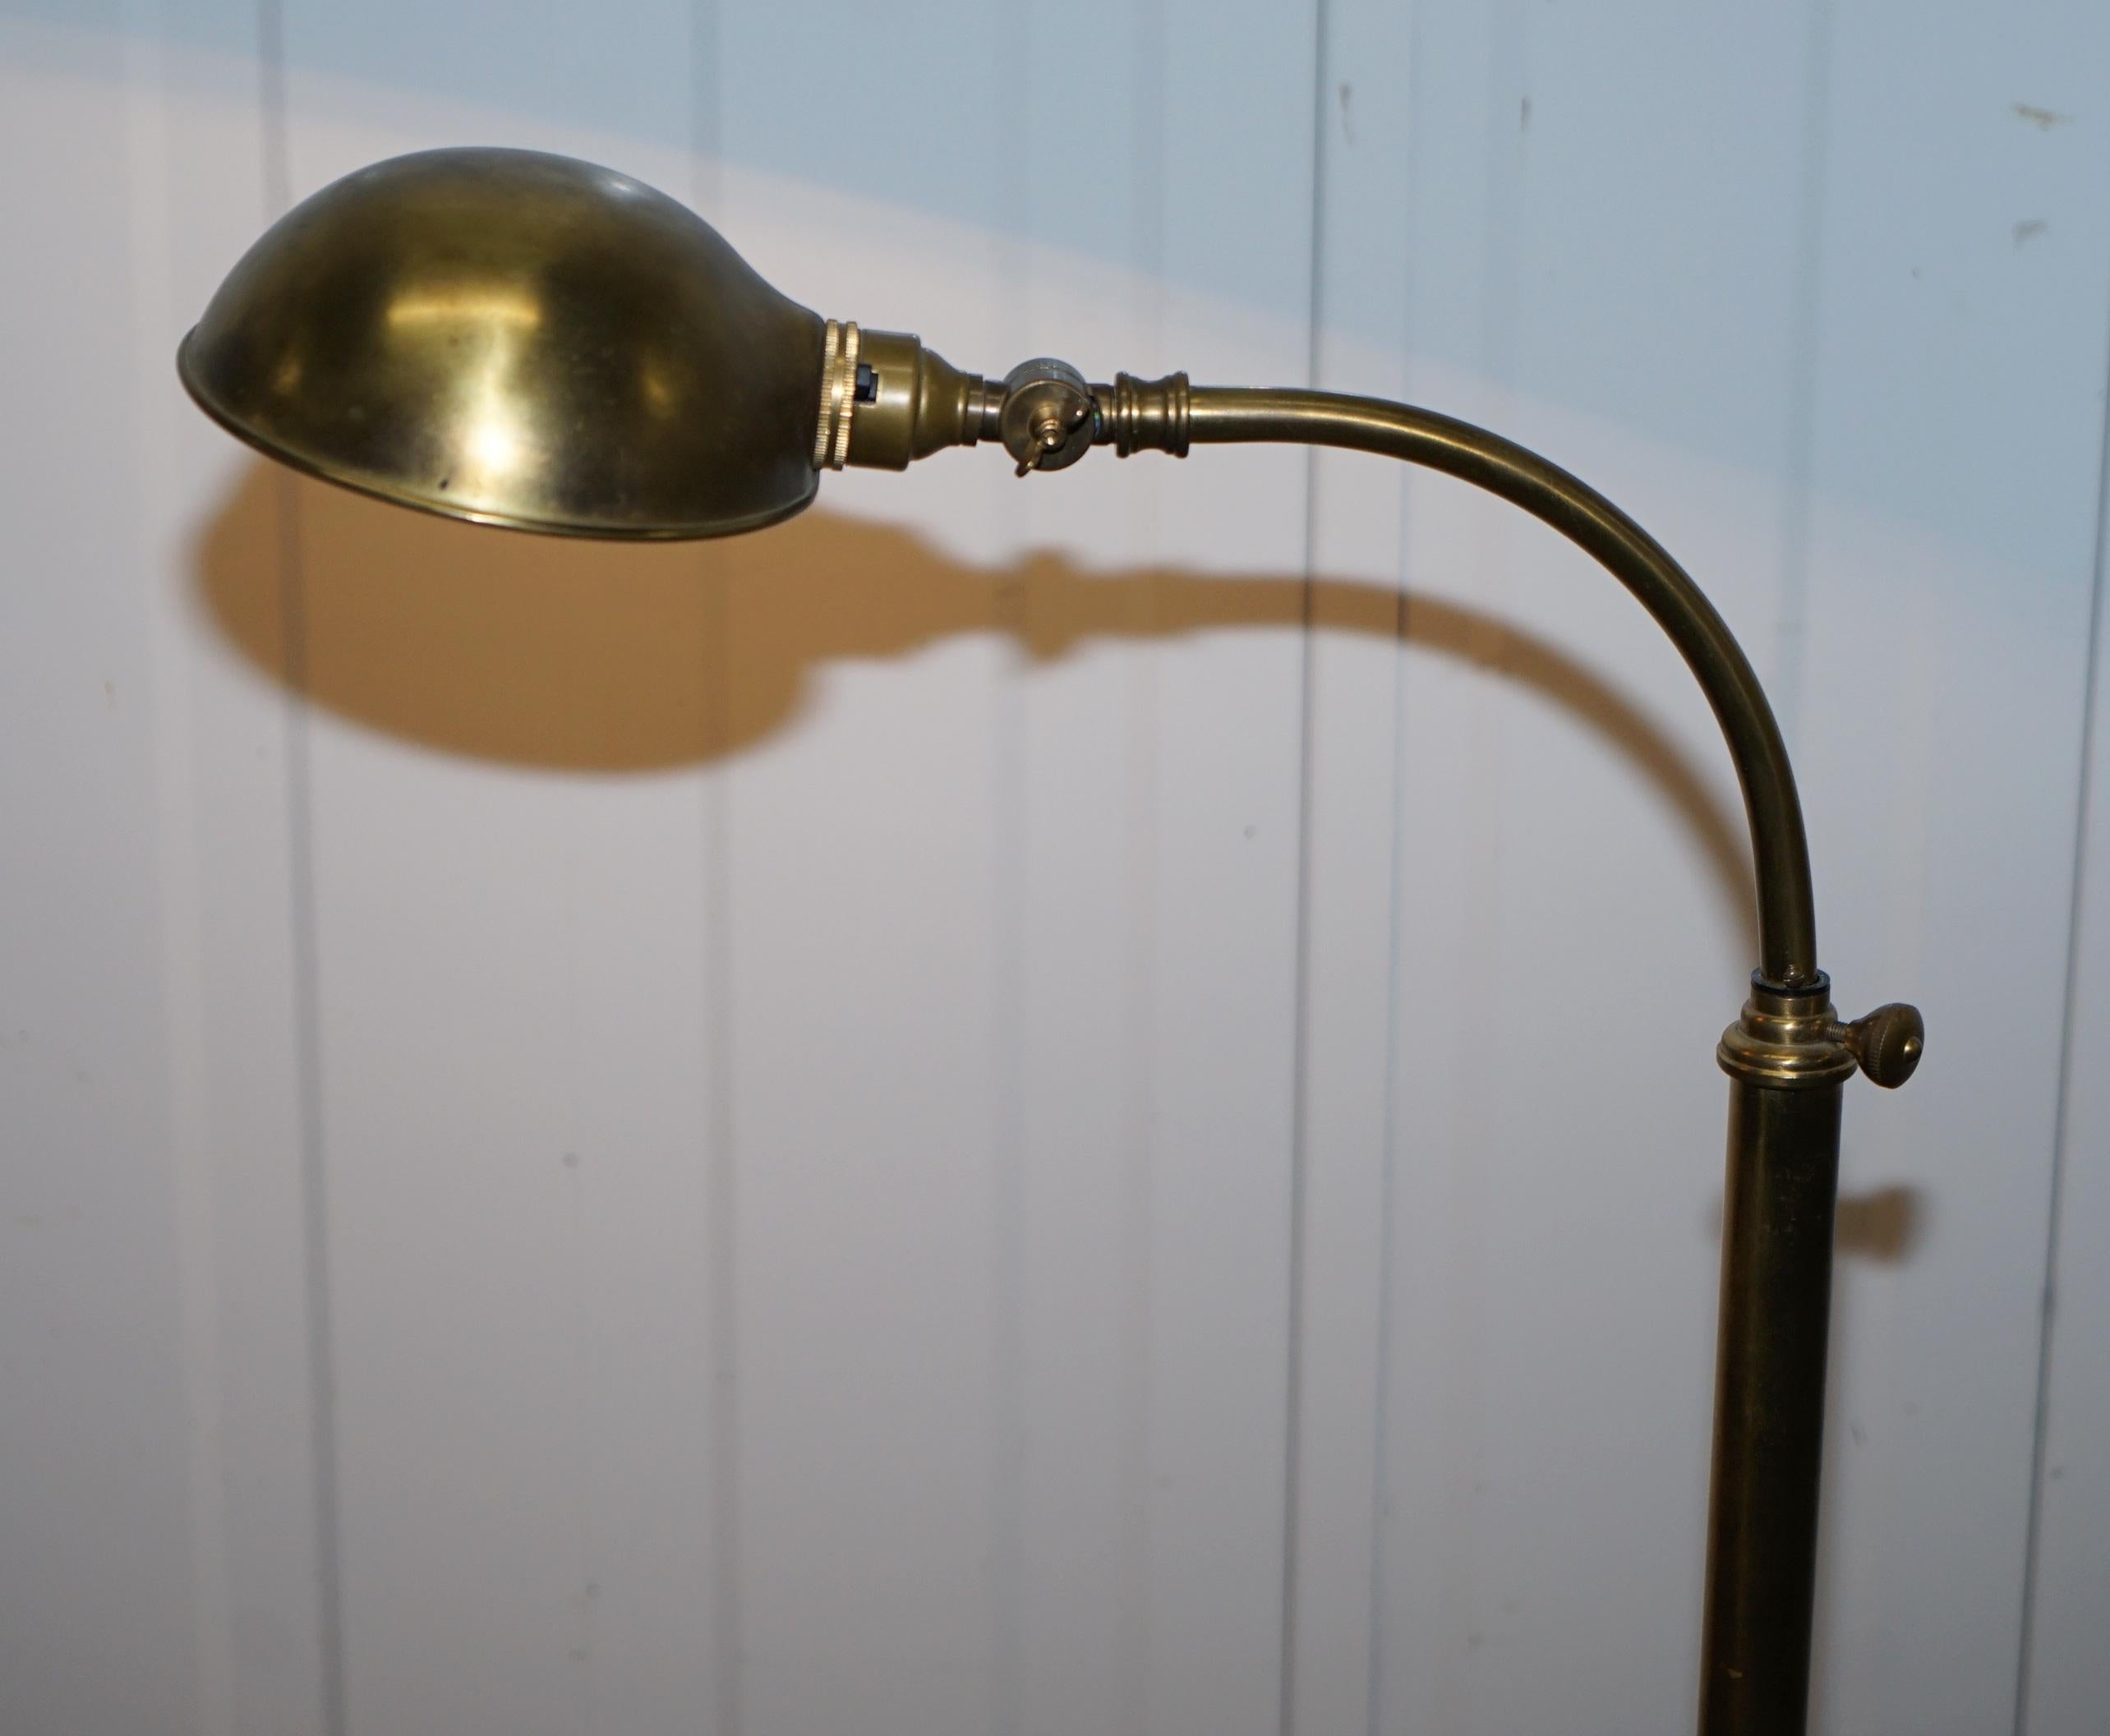 We are delighted to this lovely RRP £1365 Christopher Wrays lighting Emporium floor standing lamp in matte brass

A very good looking piece, its height adjustable as you can see with a pivoted shade so you can change the angle of the light